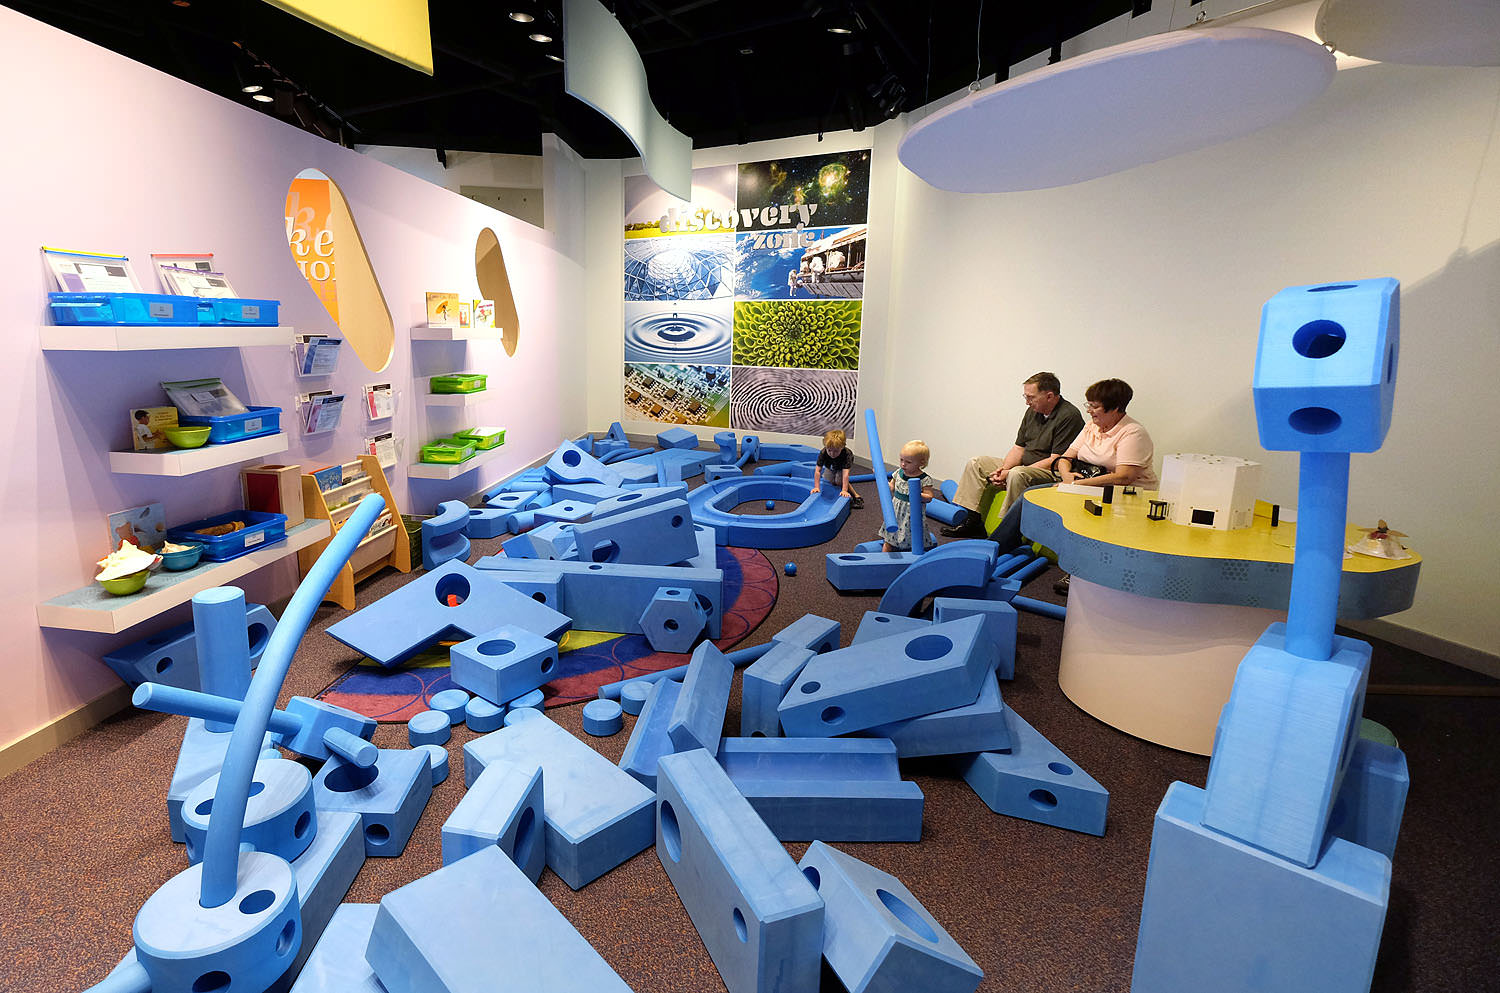 A look inside the new Children’s Science Center Lab in Fairfax